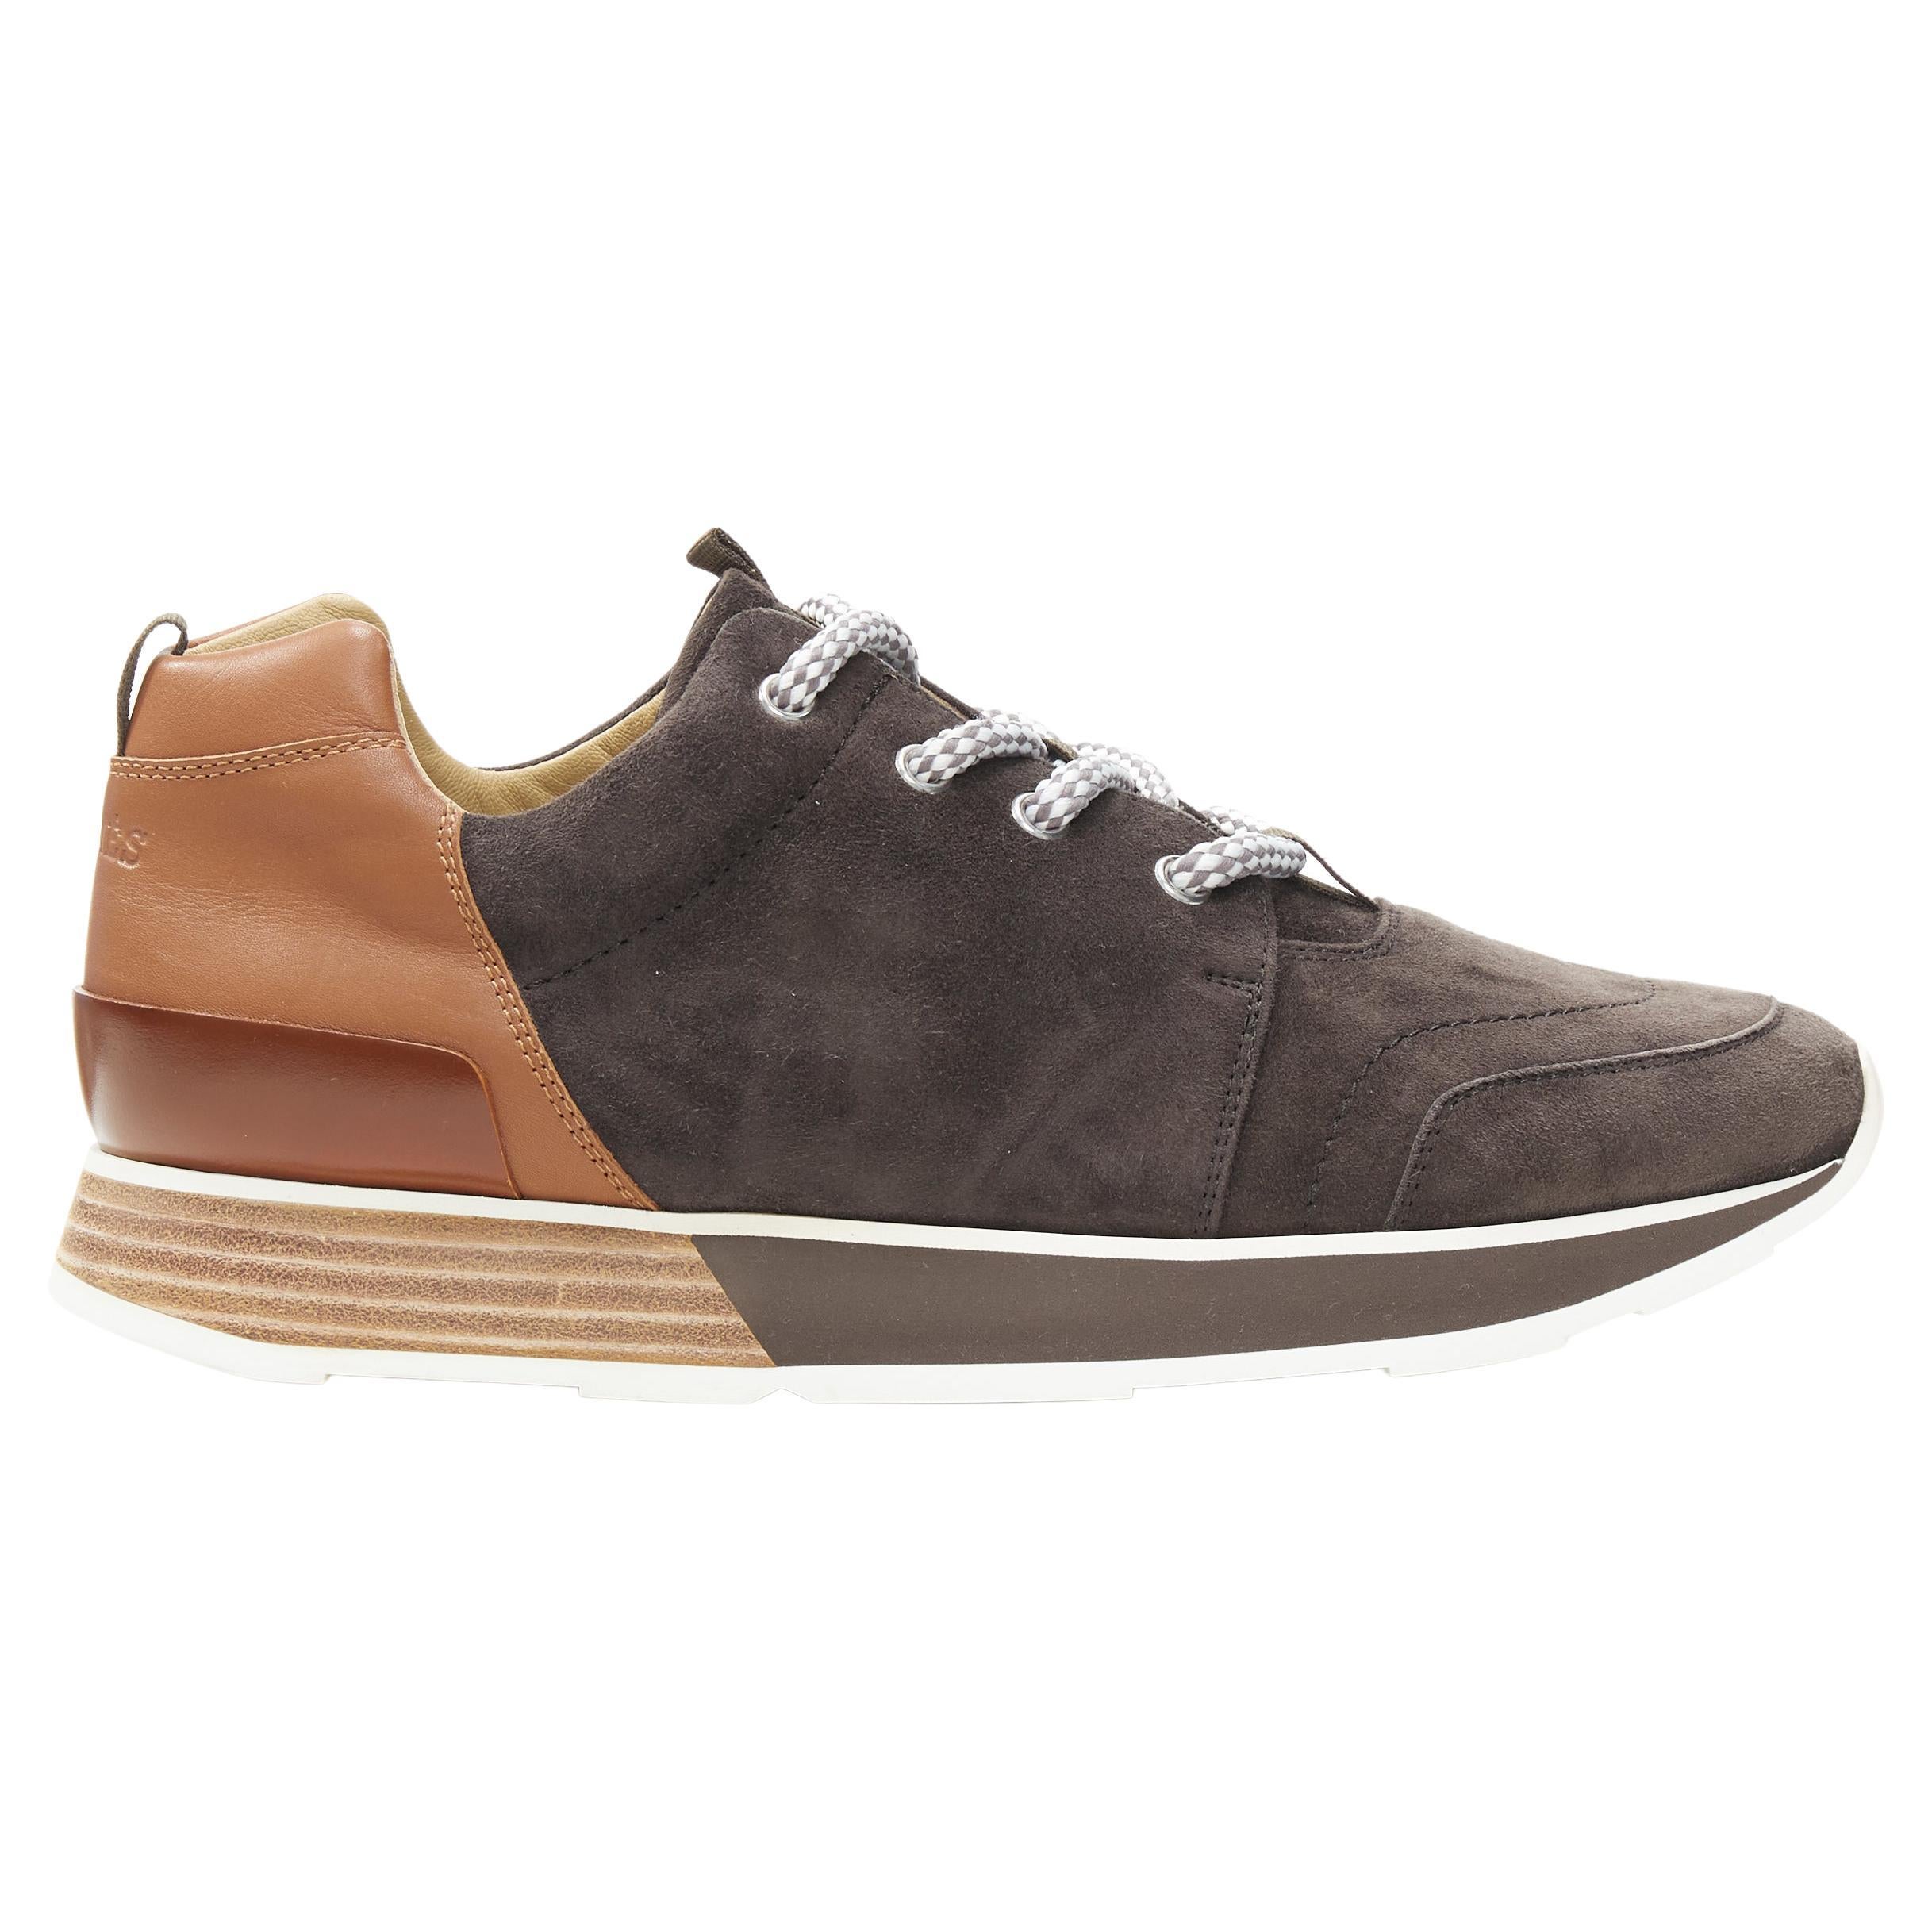 new HERMES Buster grey brown suede lace up wooden rubber sole low sneaker EU39.5